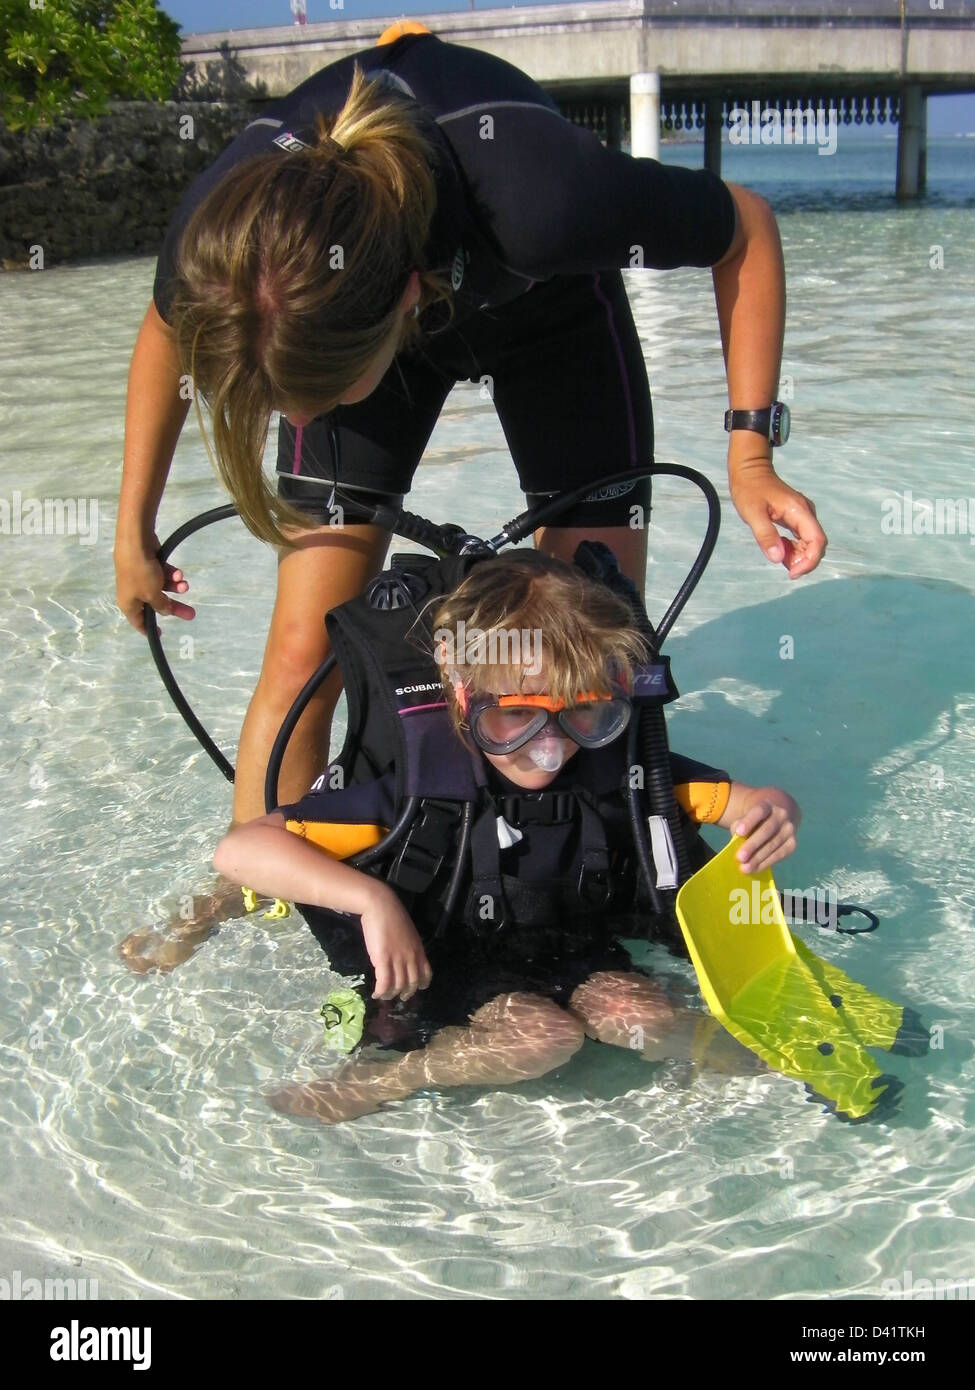 Learning to scuba dive with equipment, Kuda Hura Stock Photo